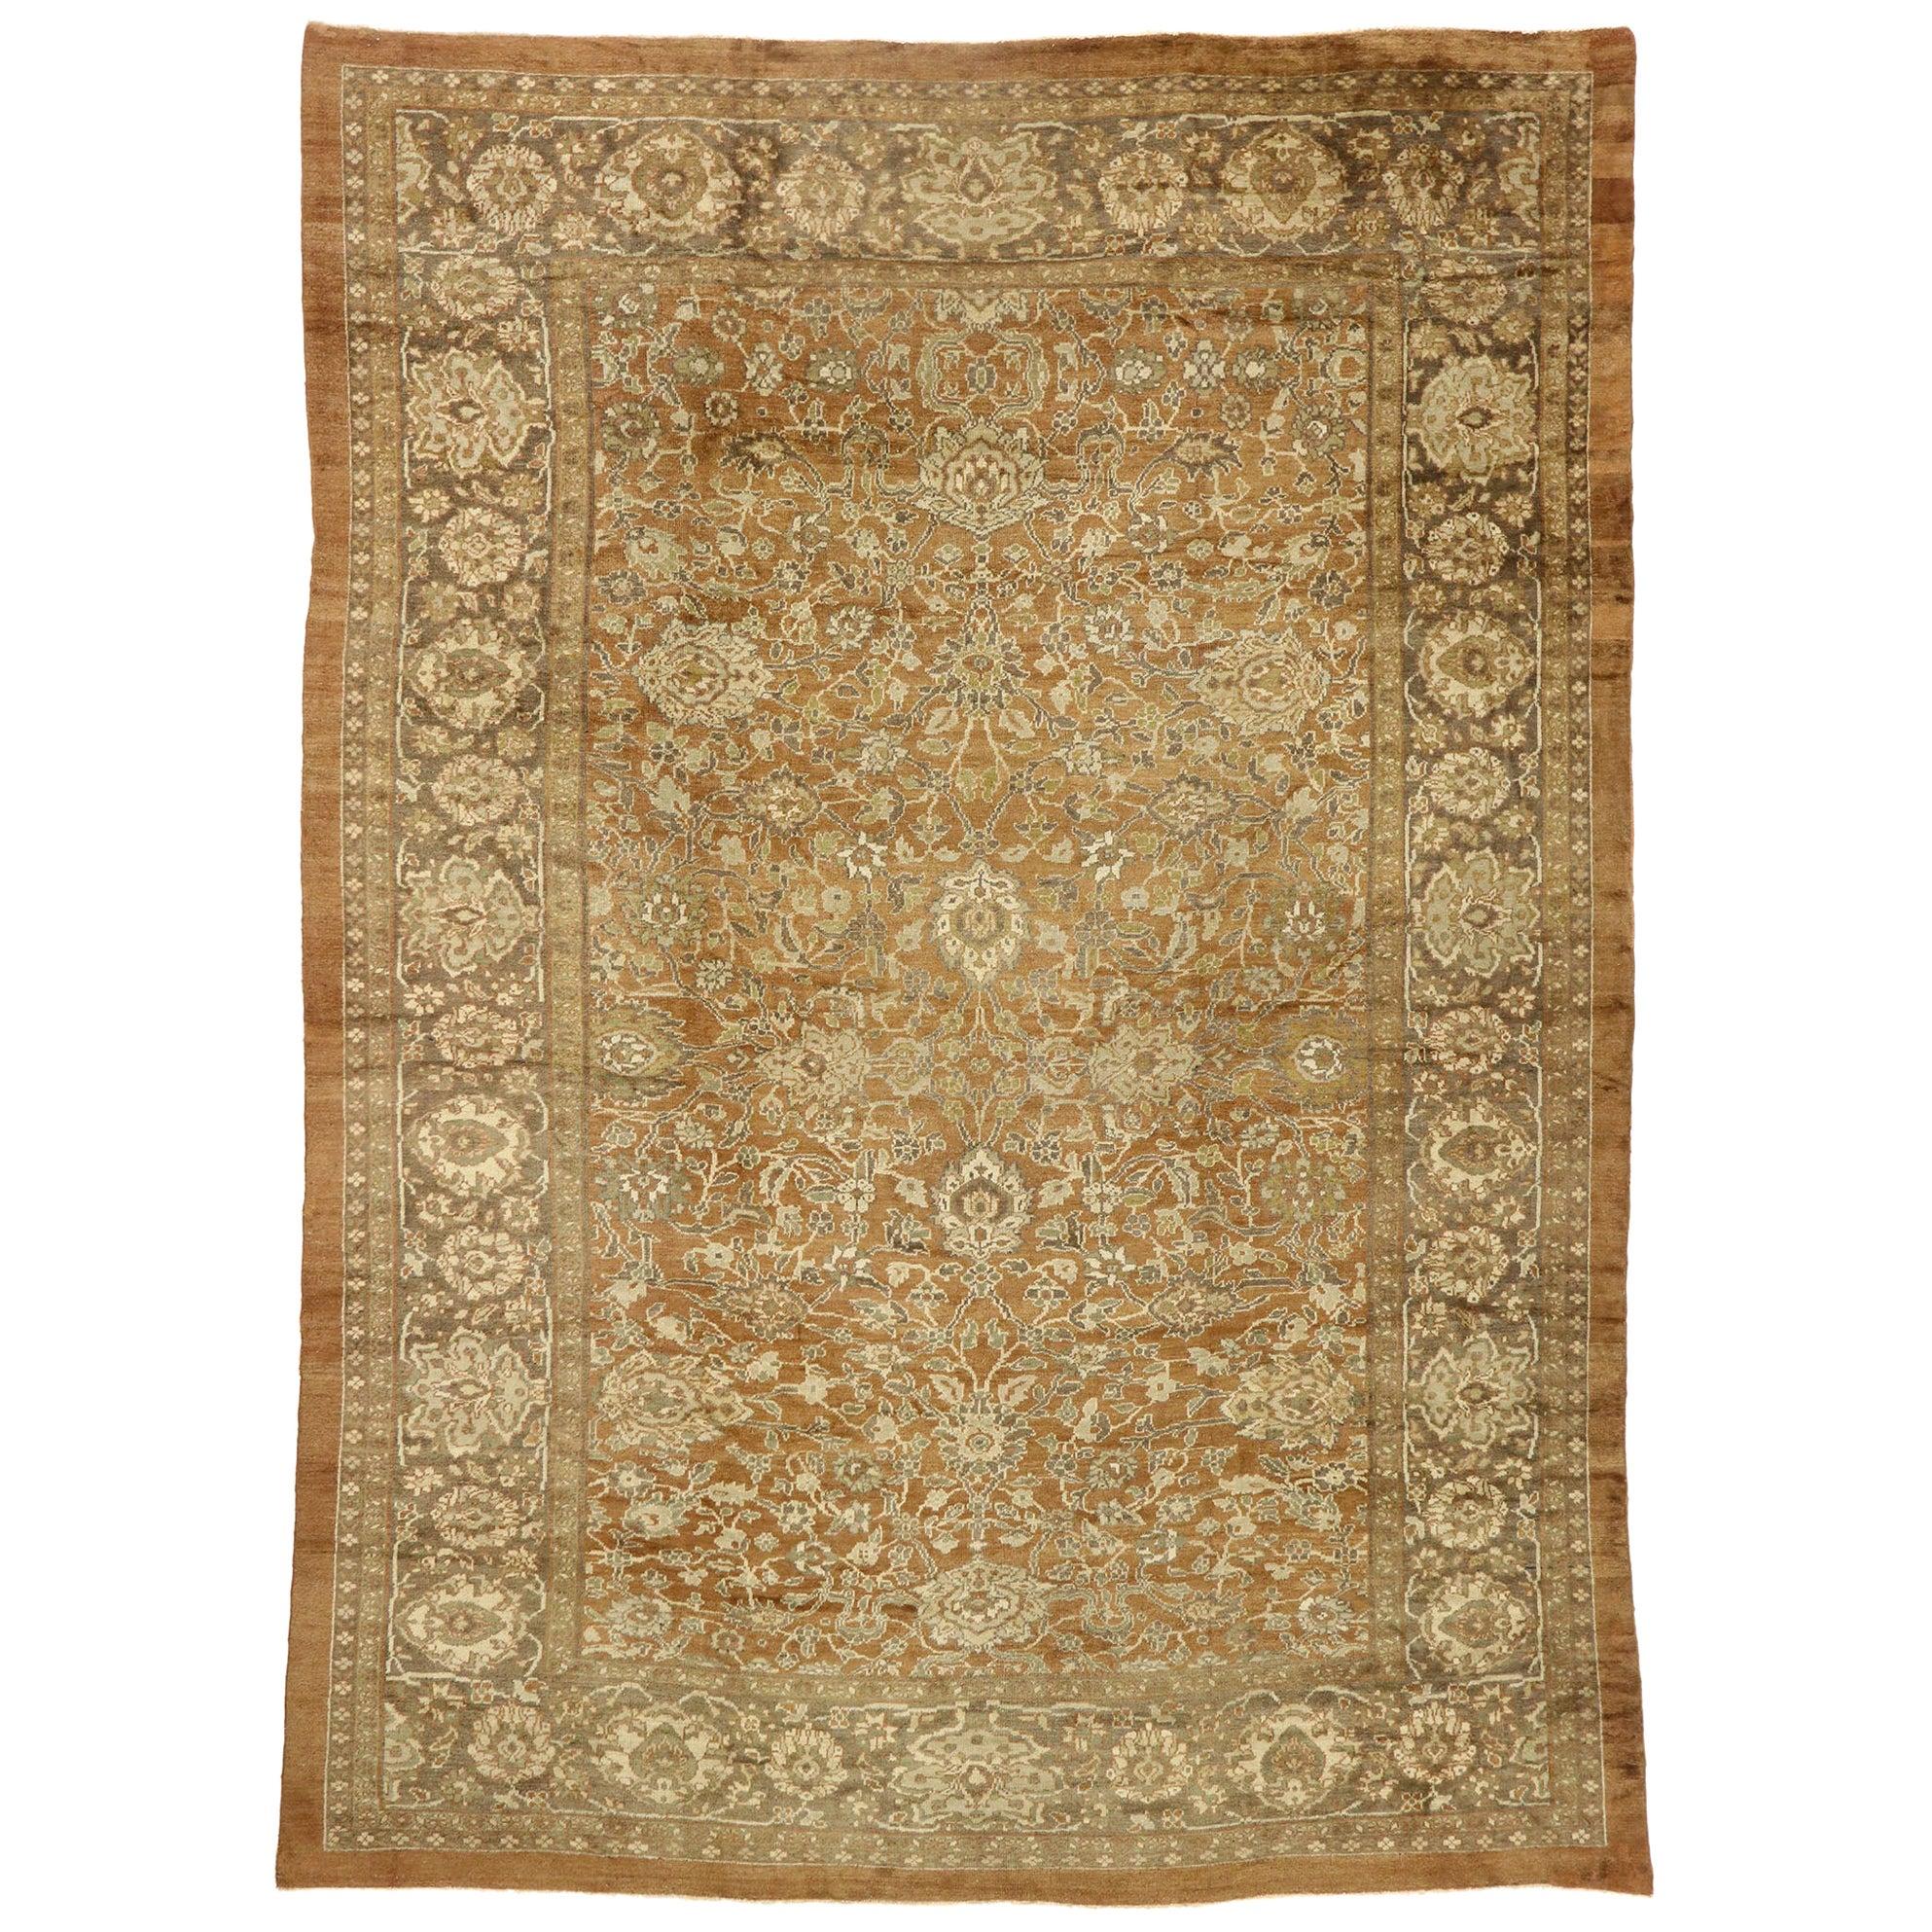 73681, antique Persian Sultanabad rug with warm Arts & Crafts style. With its timeless design and warm earth-tone colors, this hand knotted wool antique Persian Sultanabad rug astounds with its beauty. It features an all-over botanical lattice